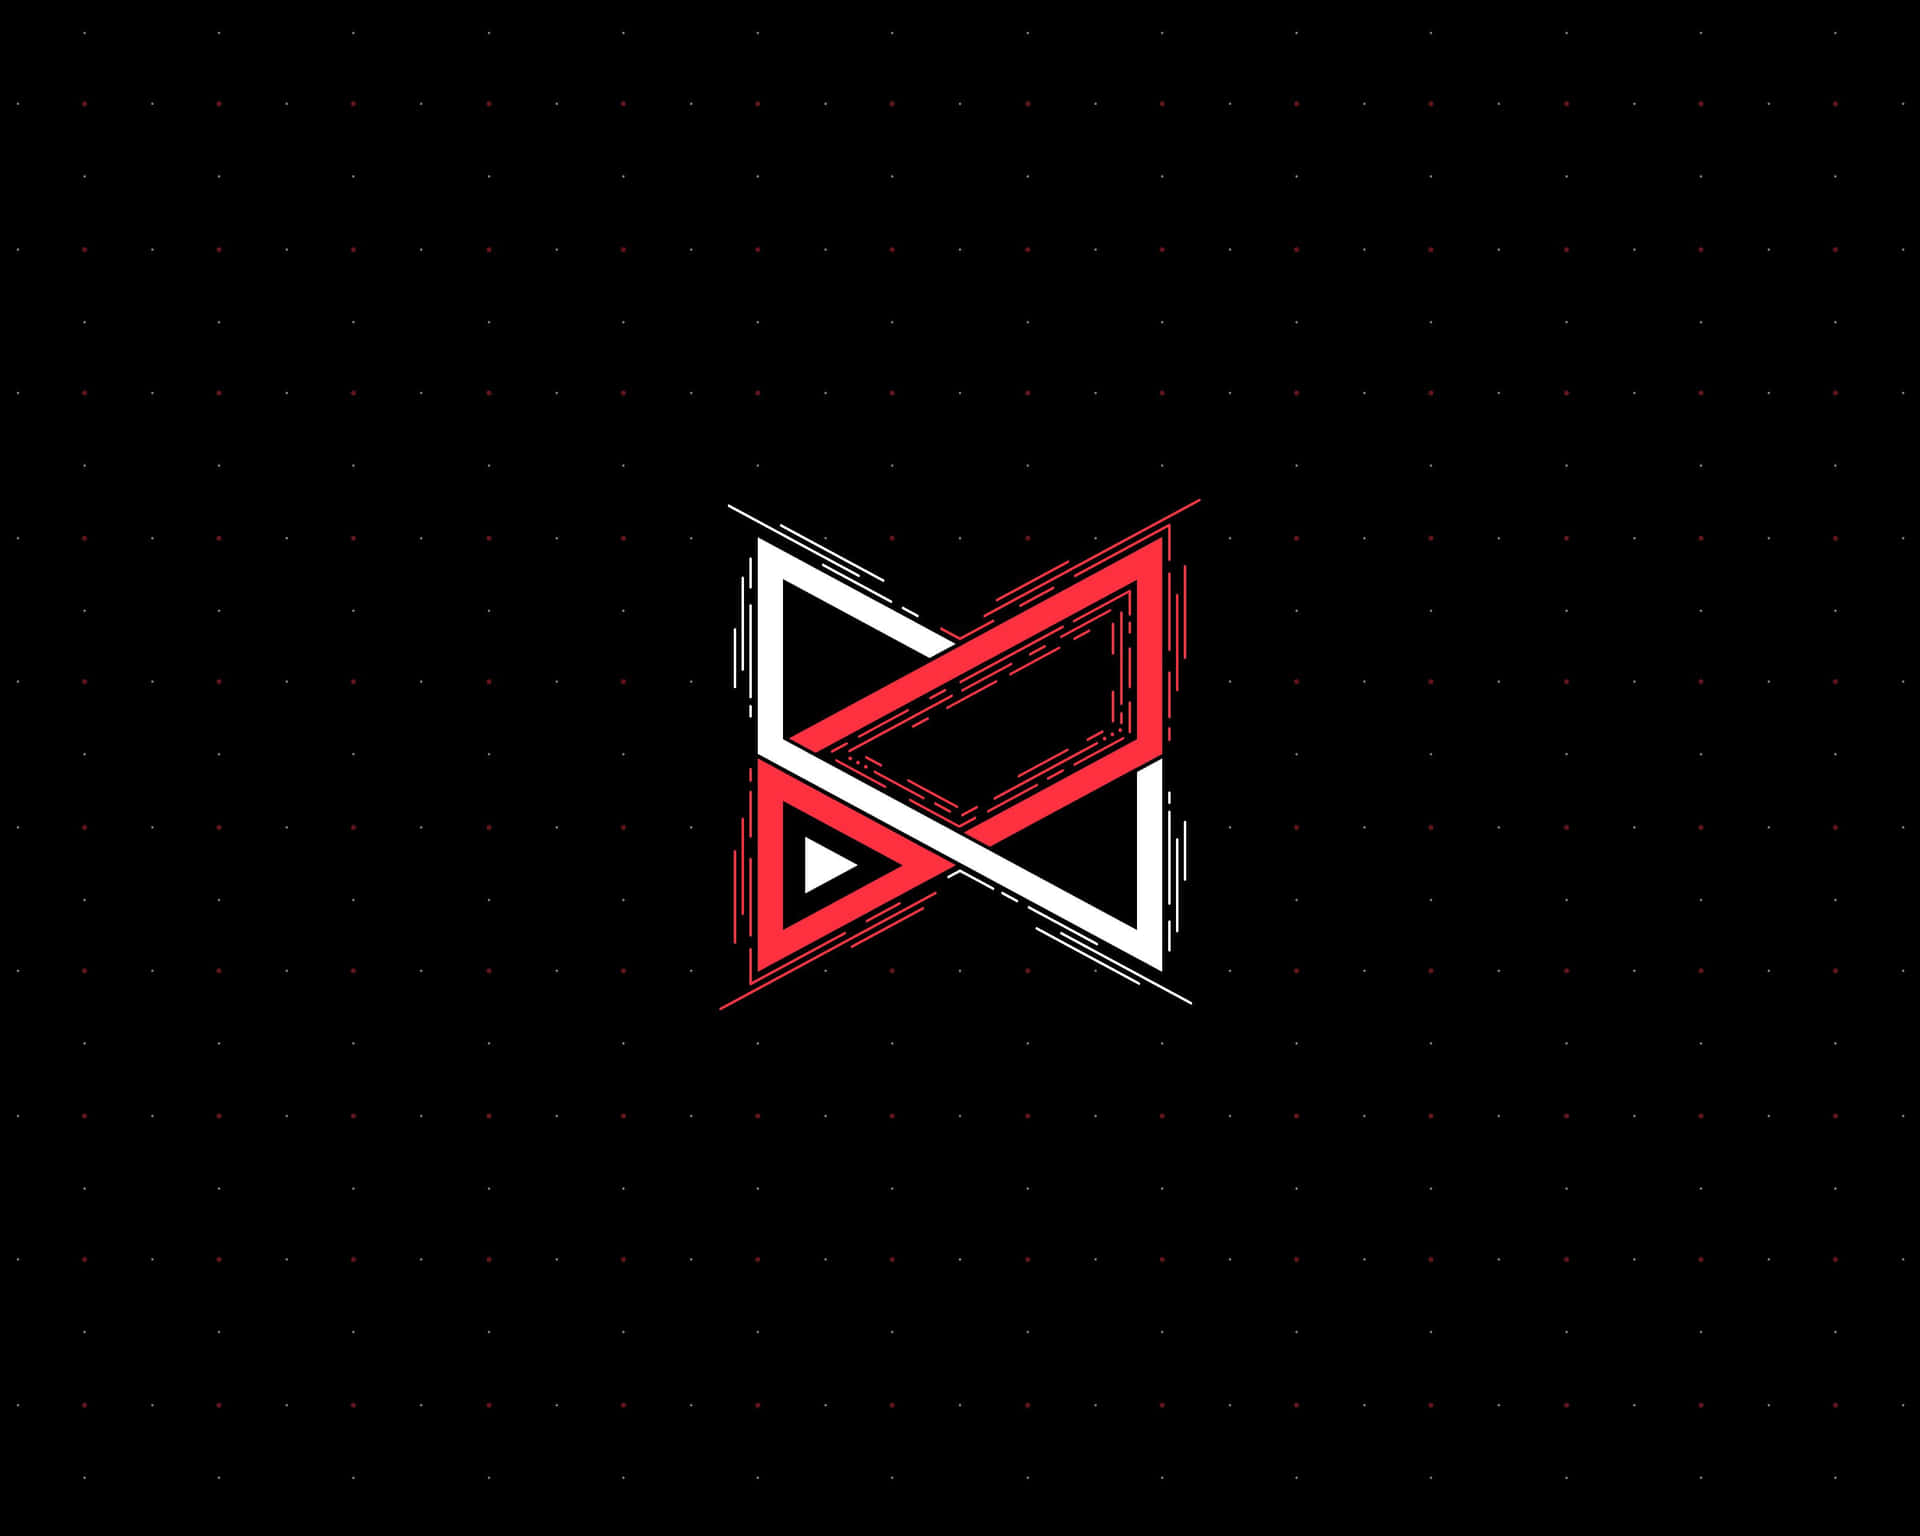 Sleek MKBHD Logo on Abstract Background Wallpaper